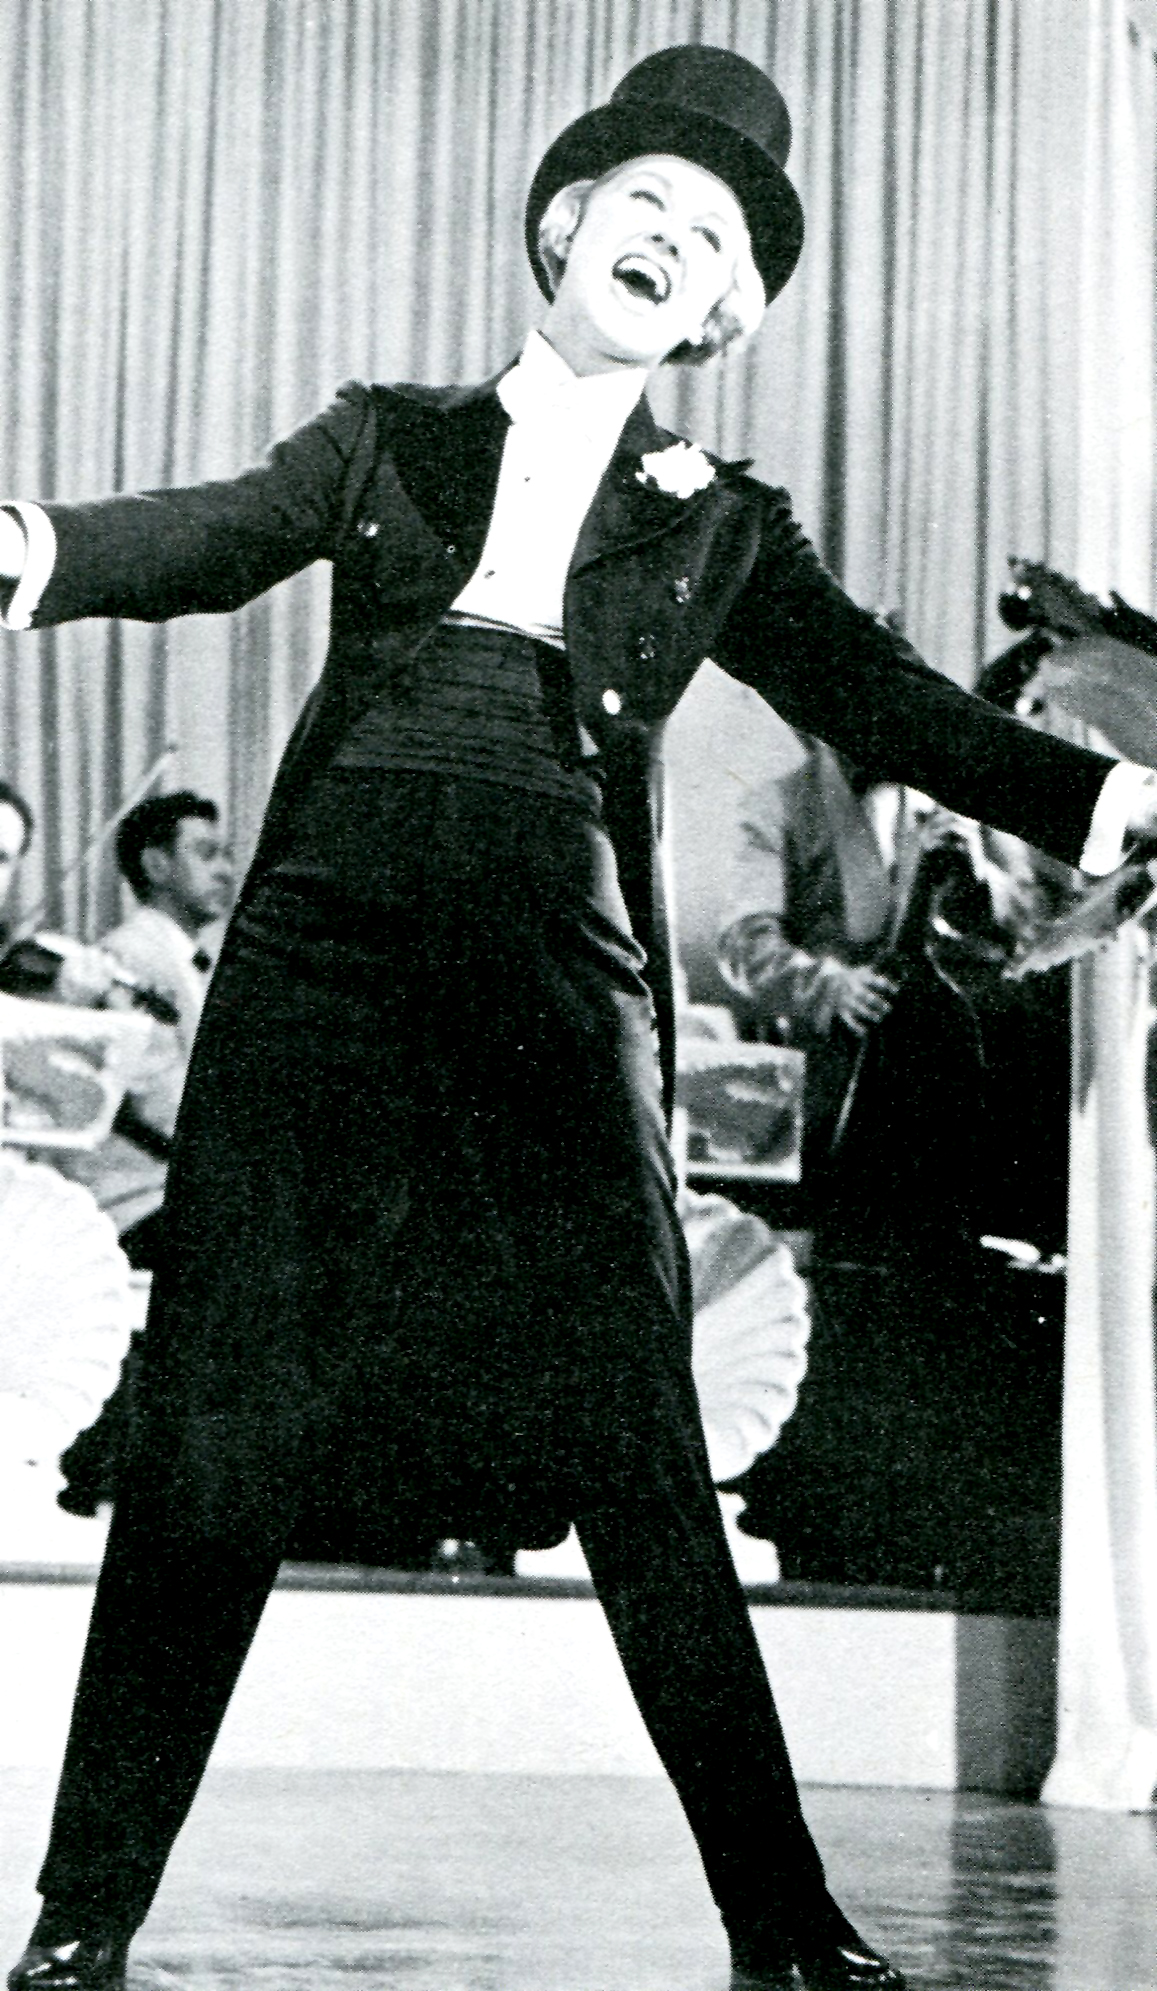 a man dancing in an event with his arms outstretched